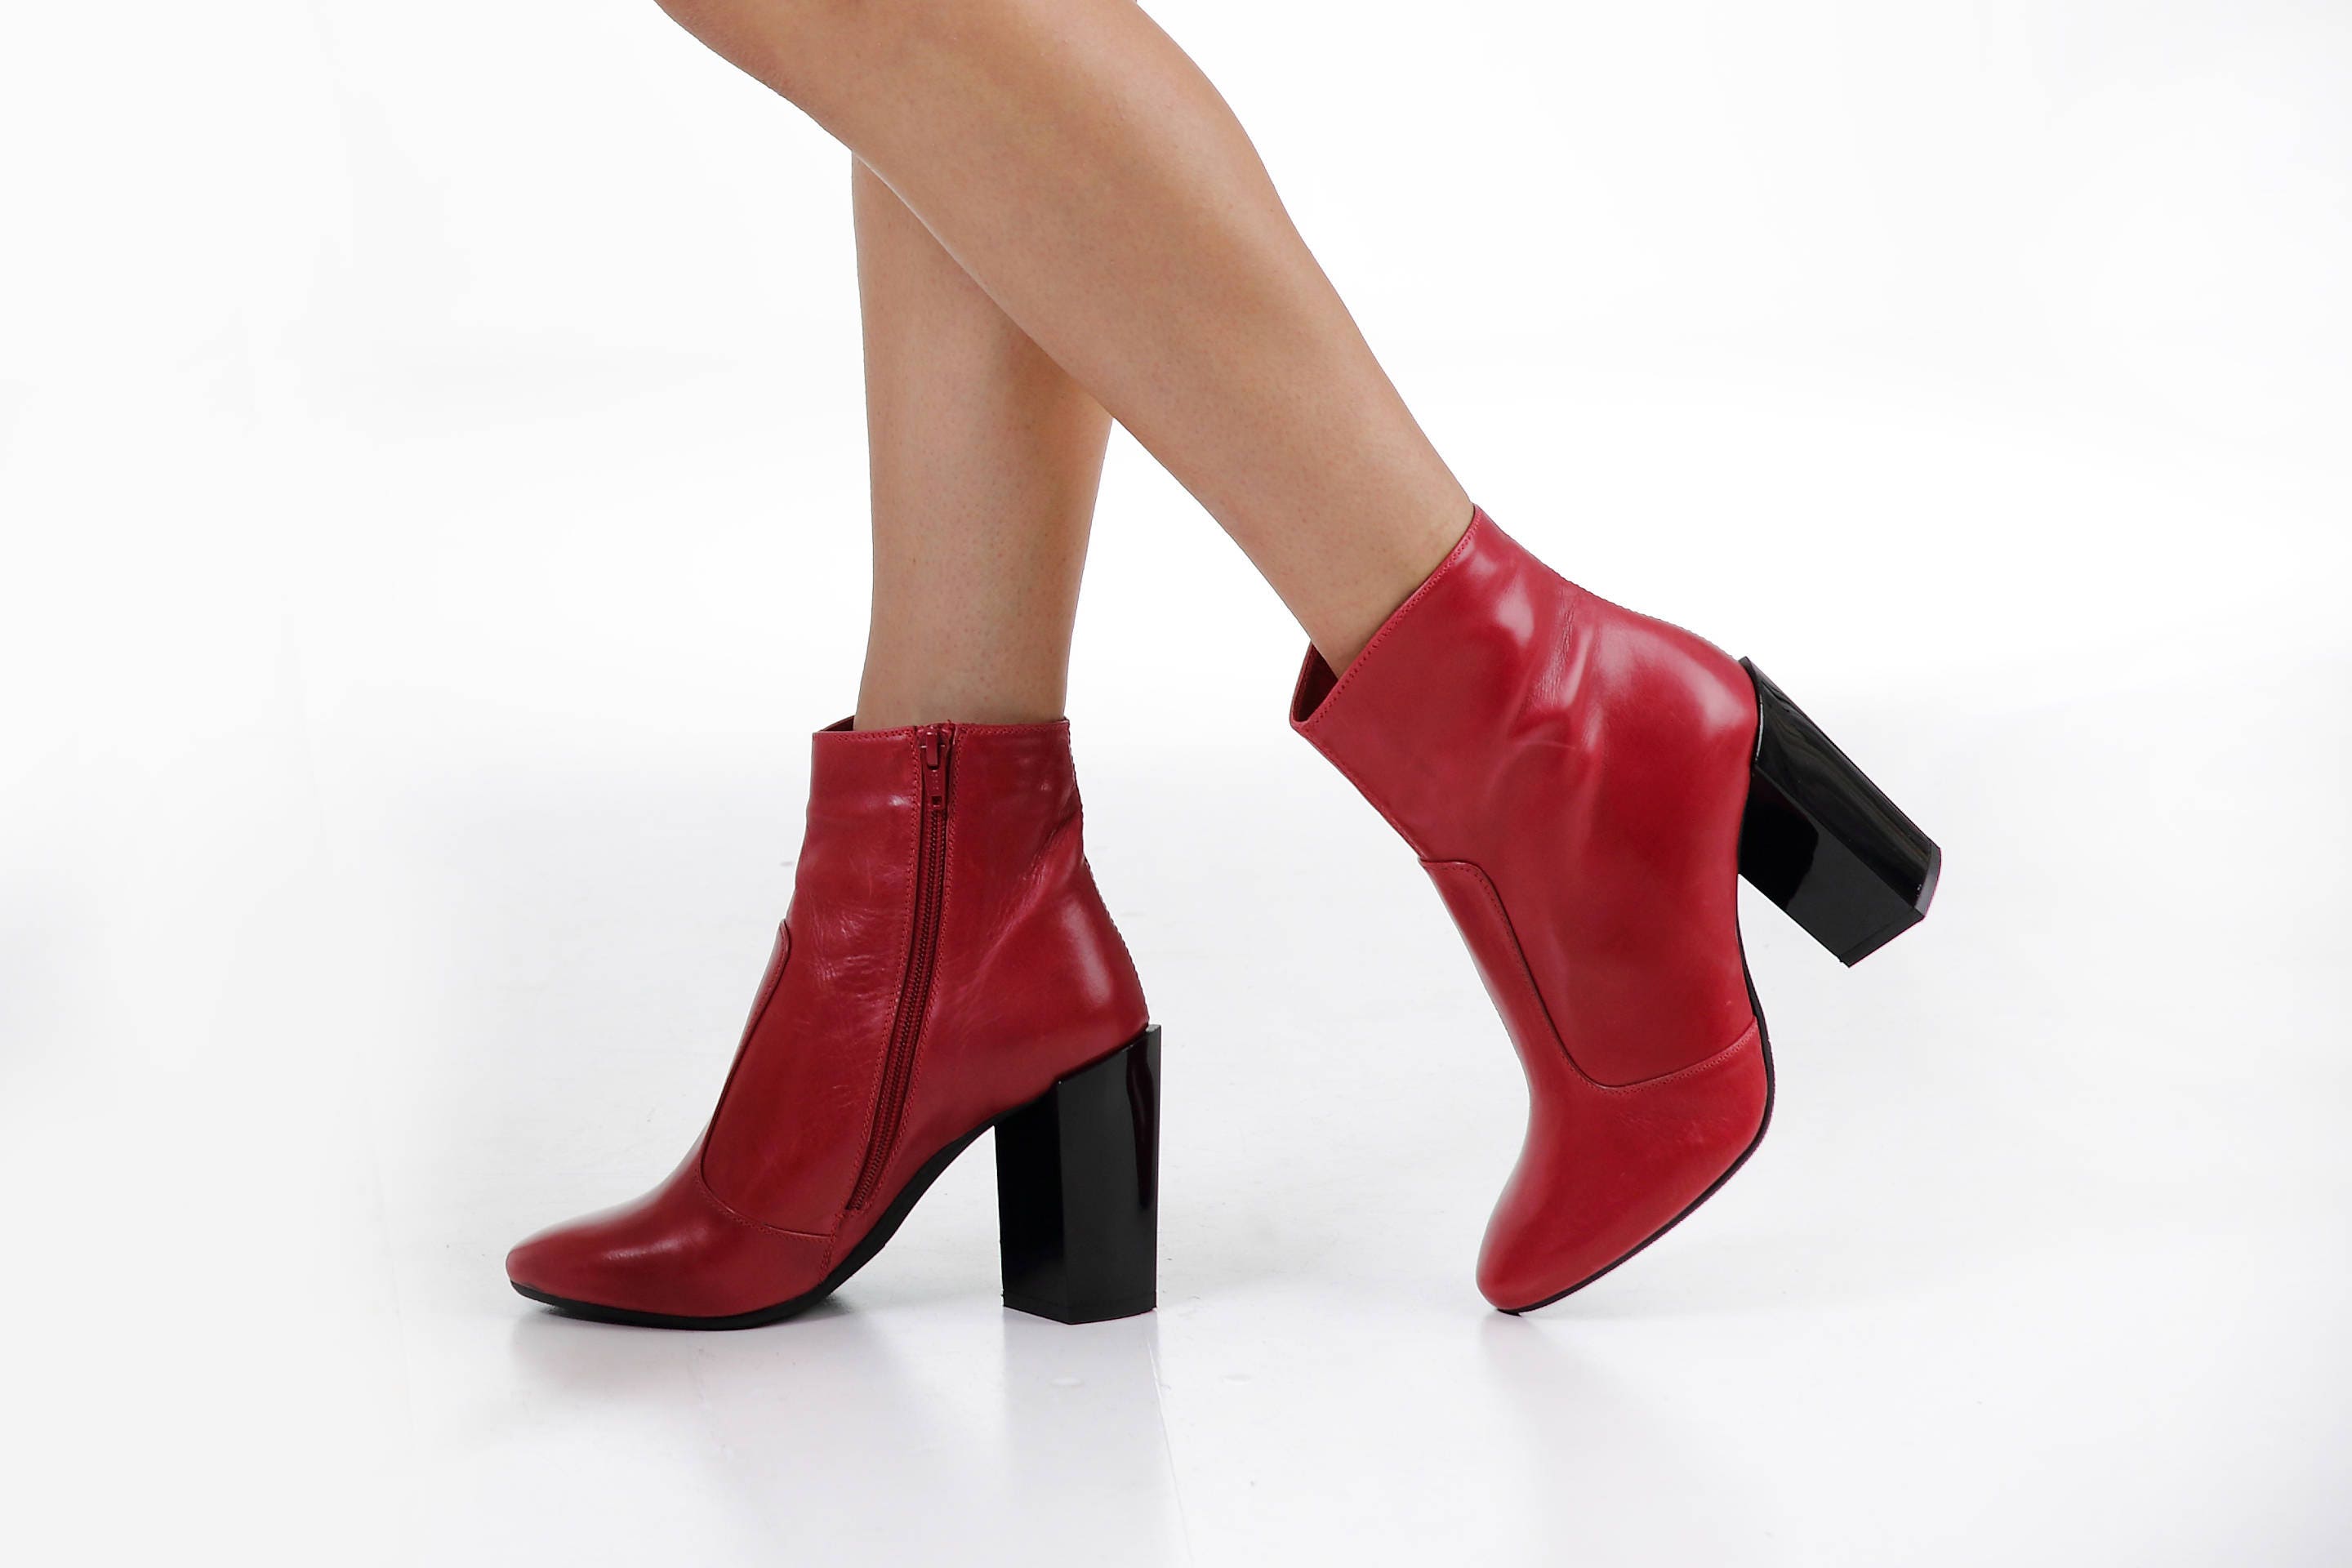 Elegant women's boots Red ankle boots Genuine leather